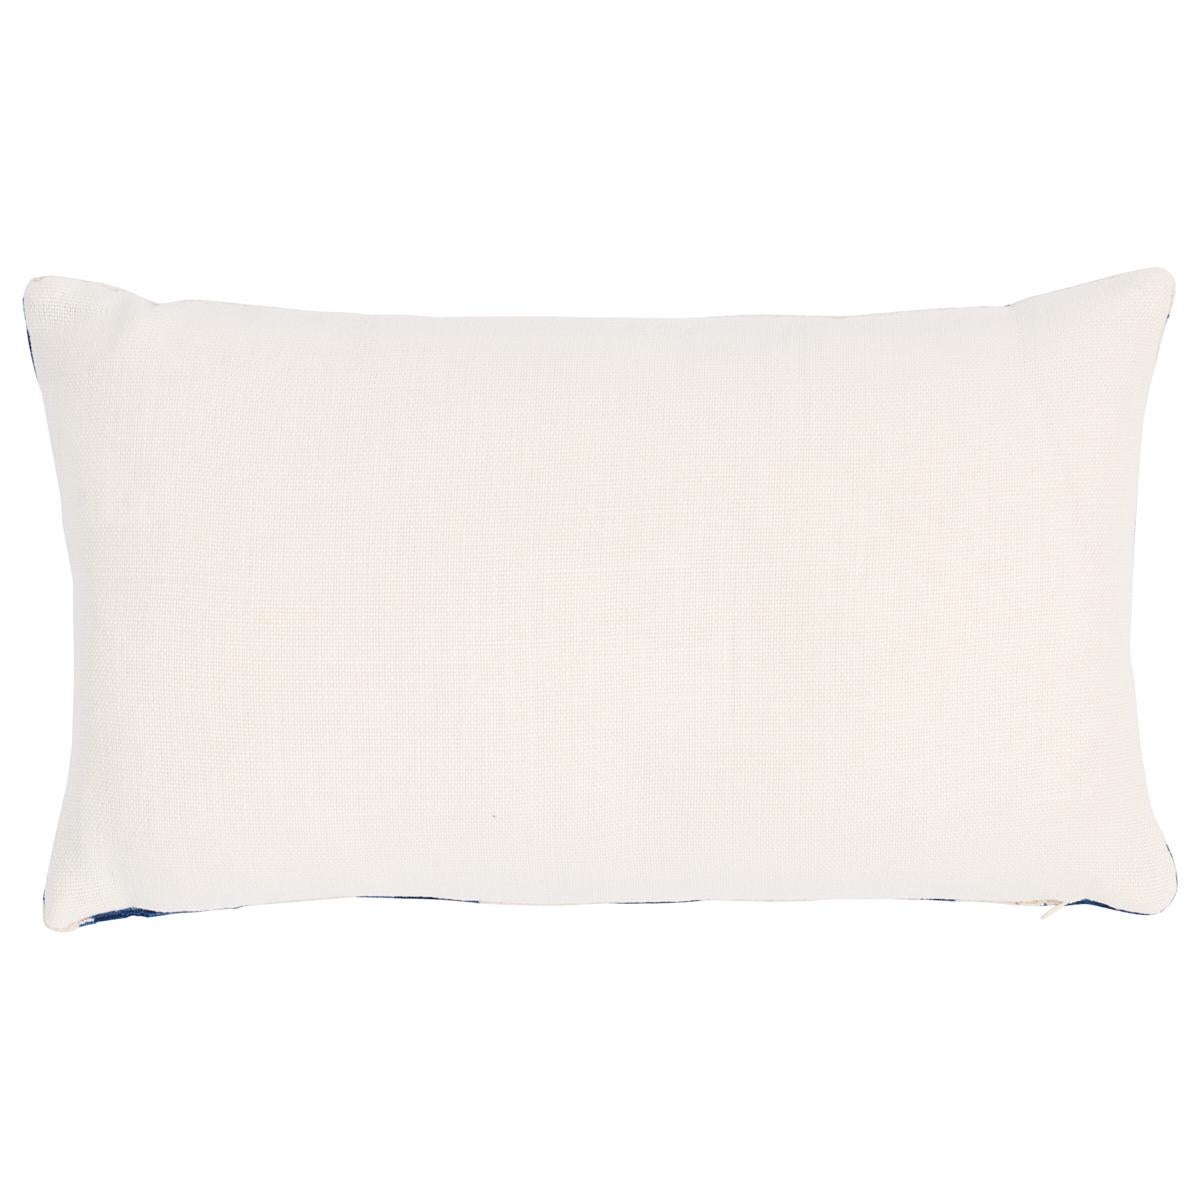 This pillow features Tutsi by David Kaihoi for Schumacher with a knife edge finish. Tutsi Velvet in blue, designed by David Kaihoi, is a hard-wearing yet sophisticated heavyweight fabric with both cut and loop pile for added texture and depth. The